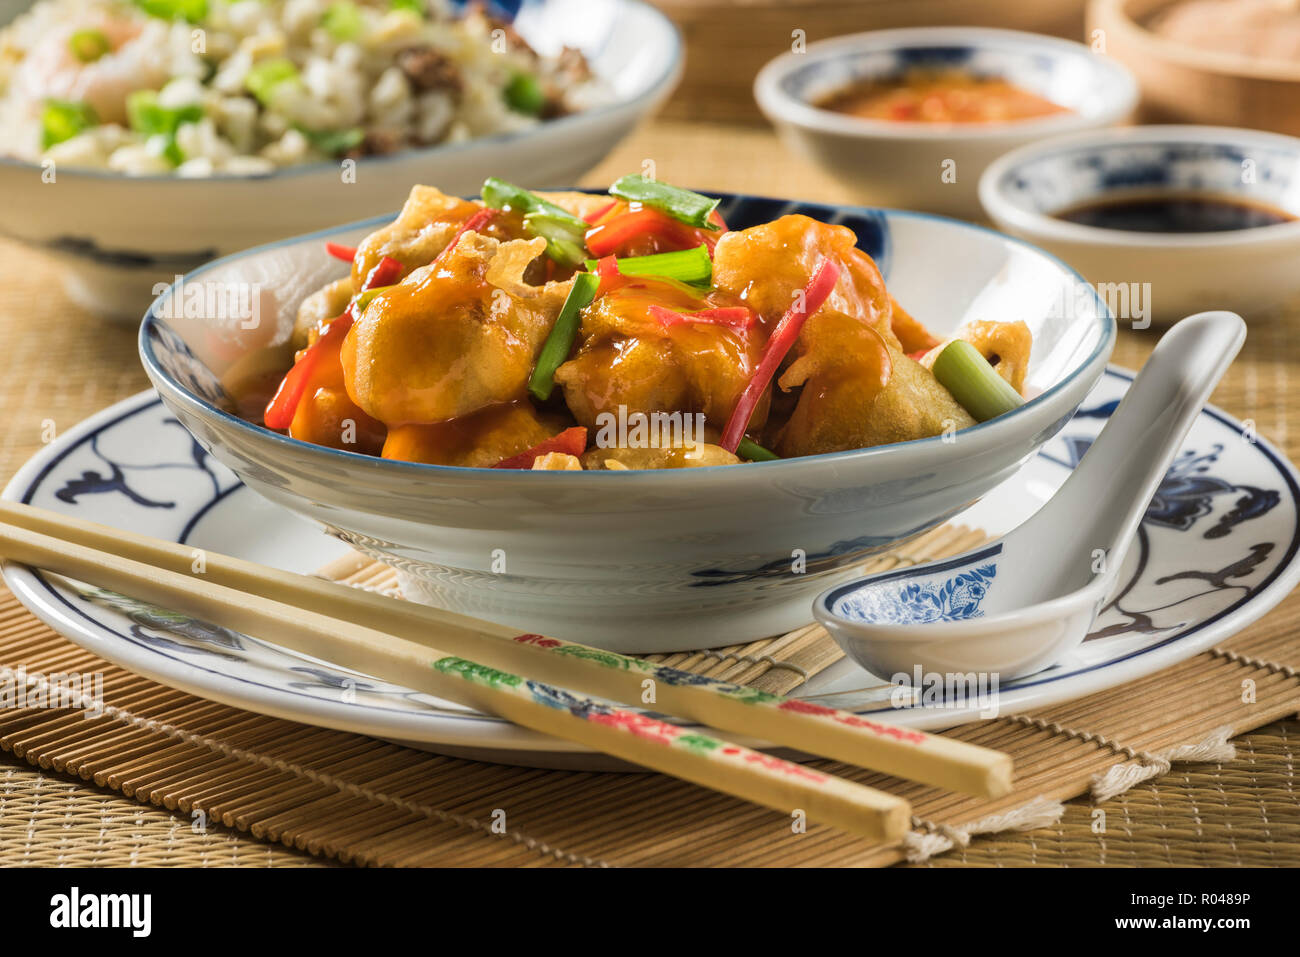 Sweet and sour pork with fried rice. Chinese food Stock Photo